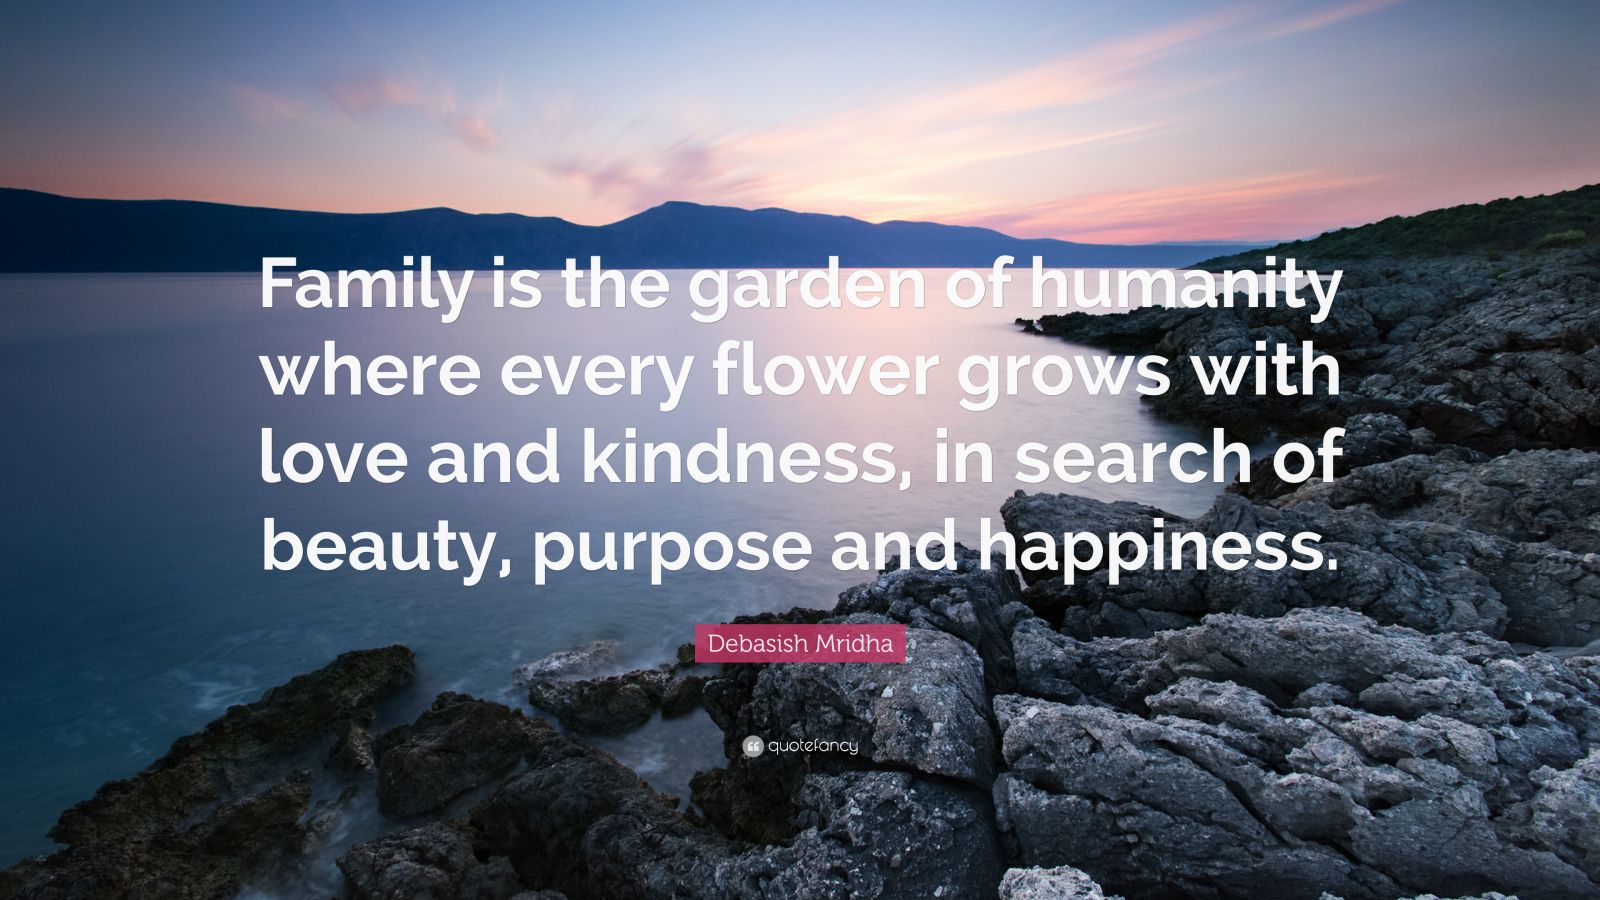 Debasish Mridha Quote: “Family is the garden of humanity where every ...